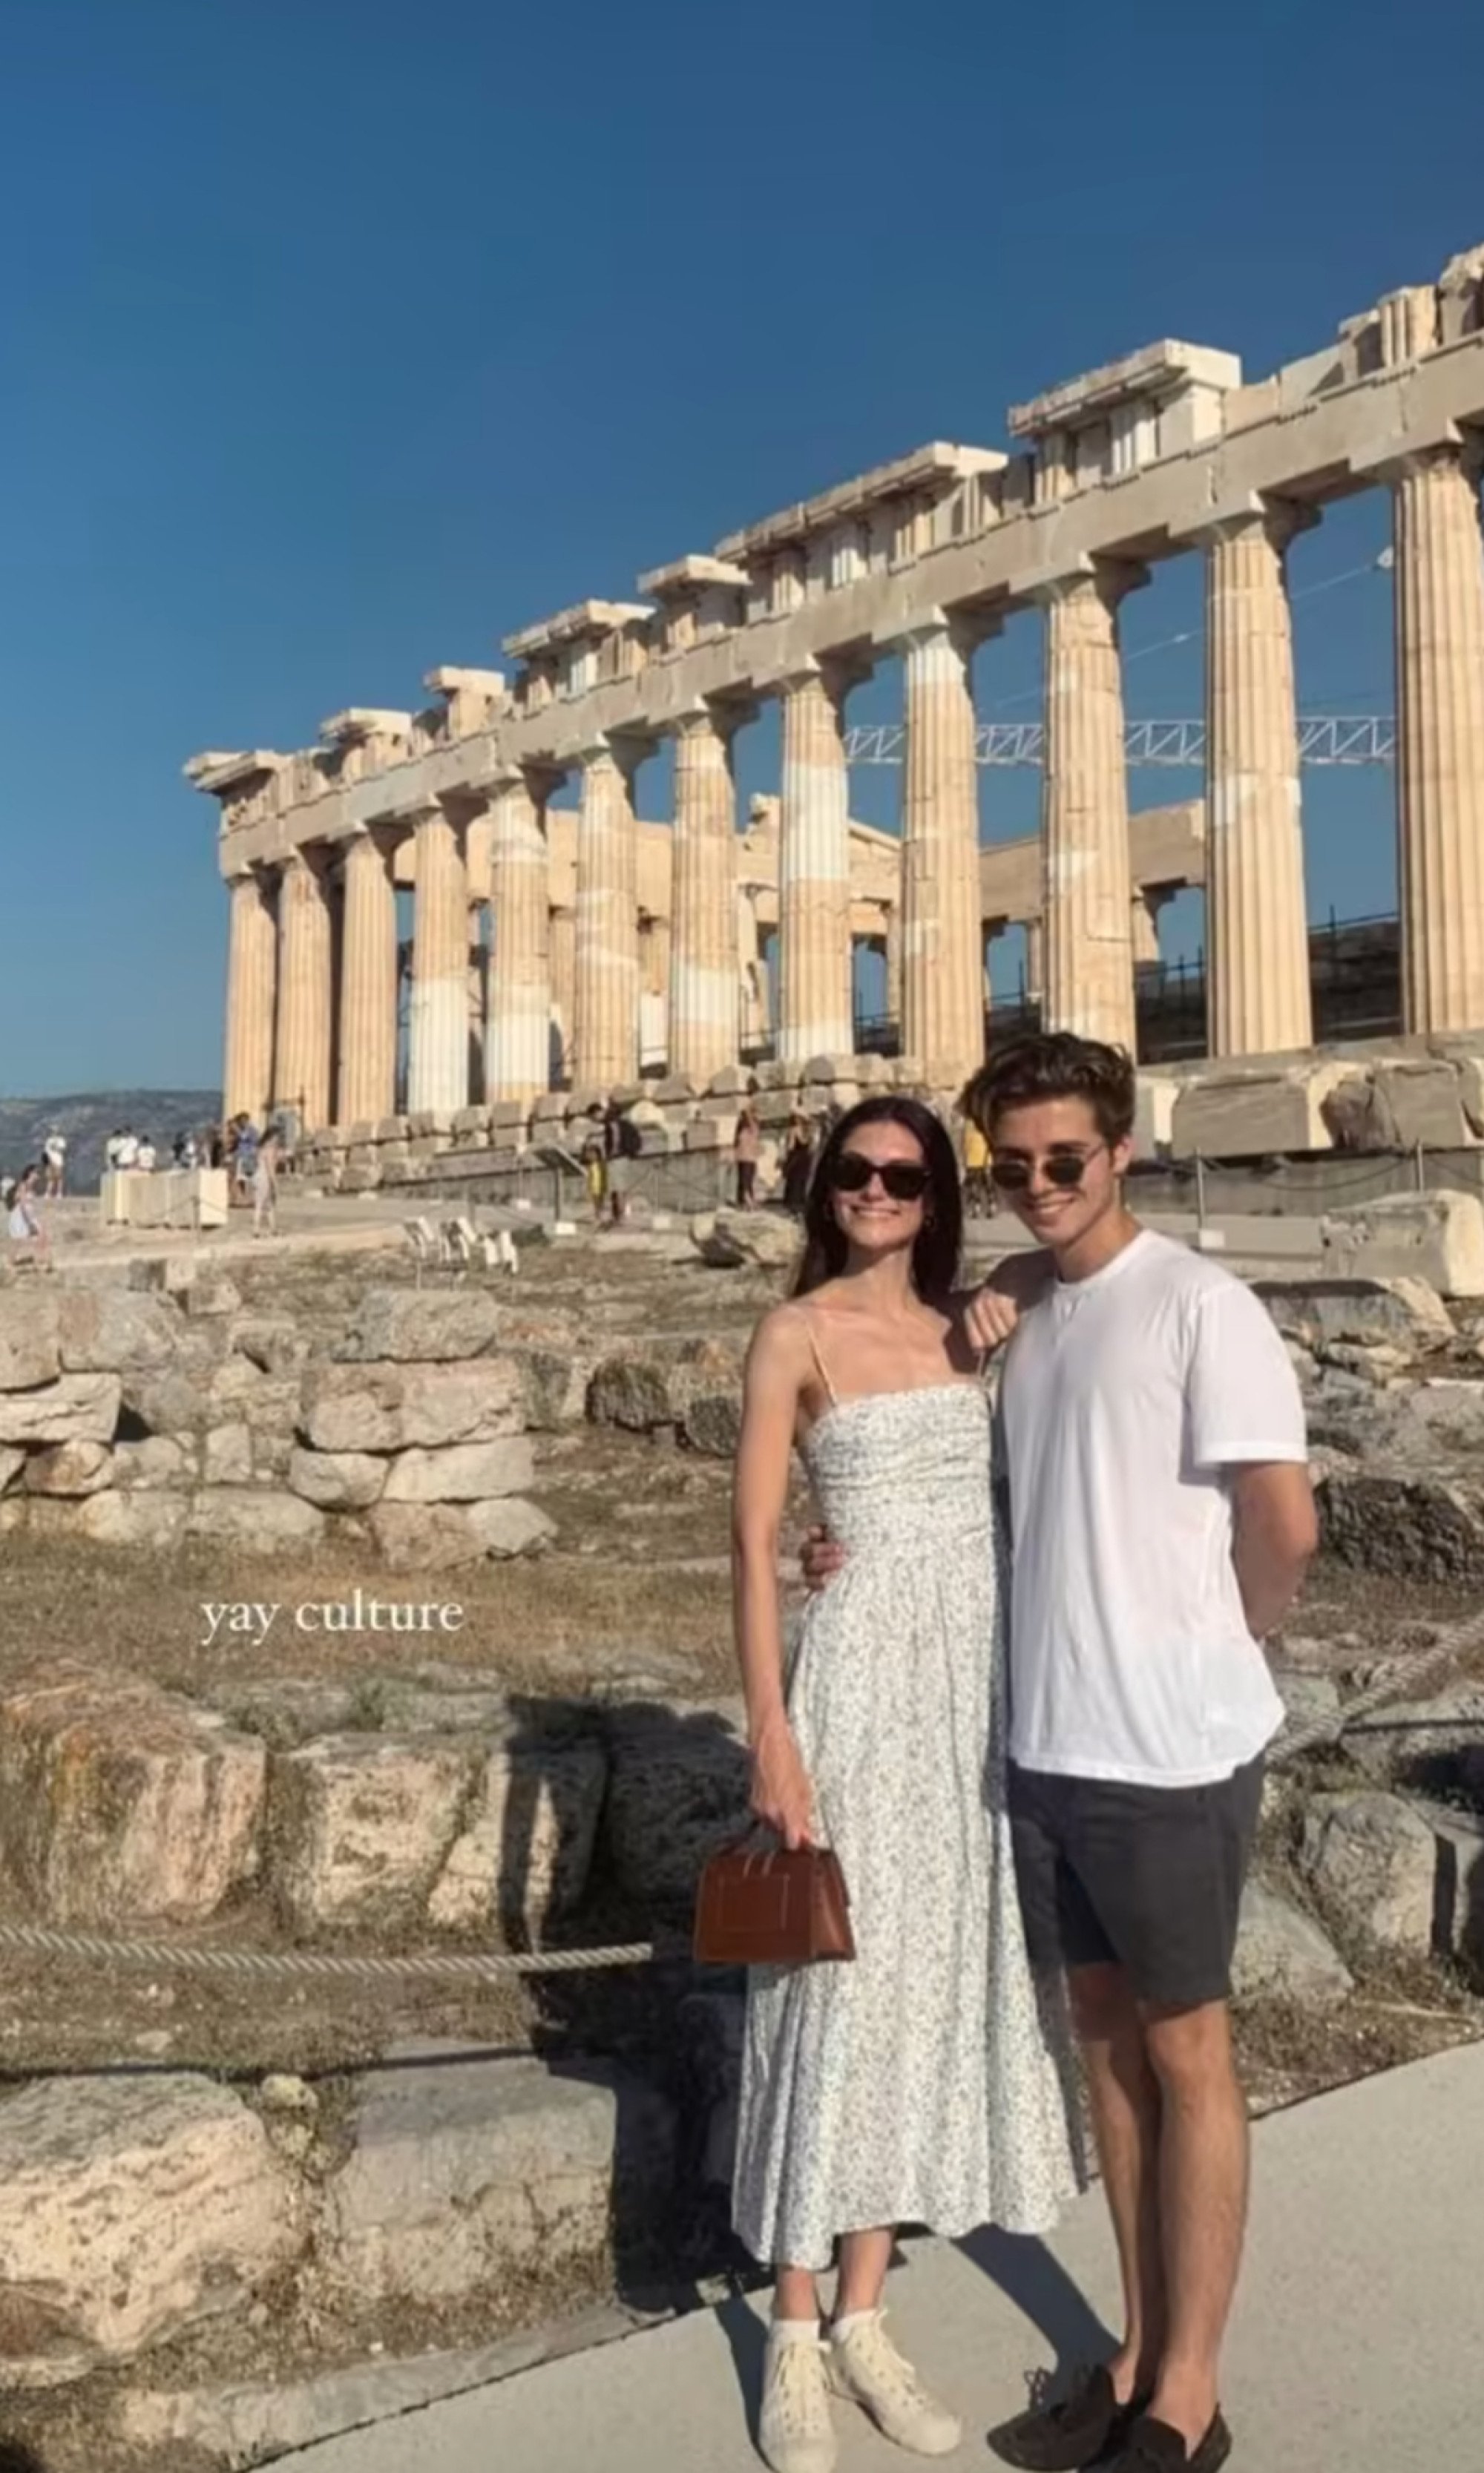 Isabella Massenet and Prince Achileas-Andreas of Greece and Denmark on holiday. Photo: @isabellamassenet/Instagram (via Hola)